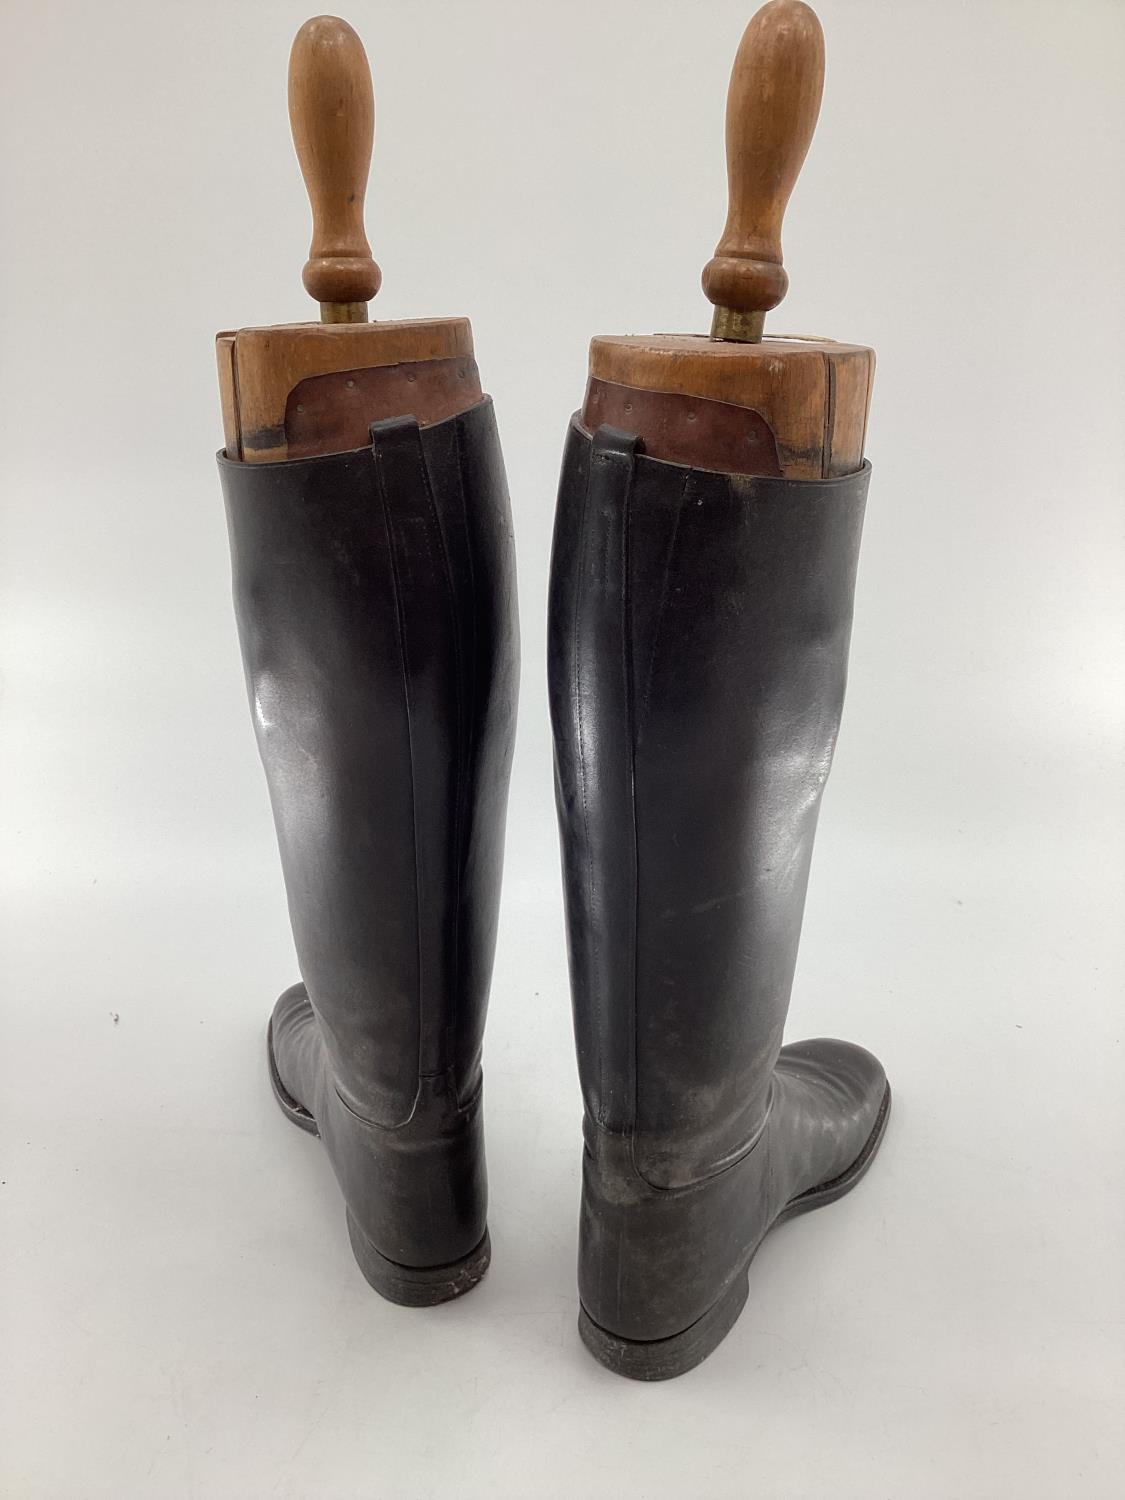 Pair of black leather hunting boots by Rowell and Sons Melton Mowbray with wooden trees - Image 4 of 6